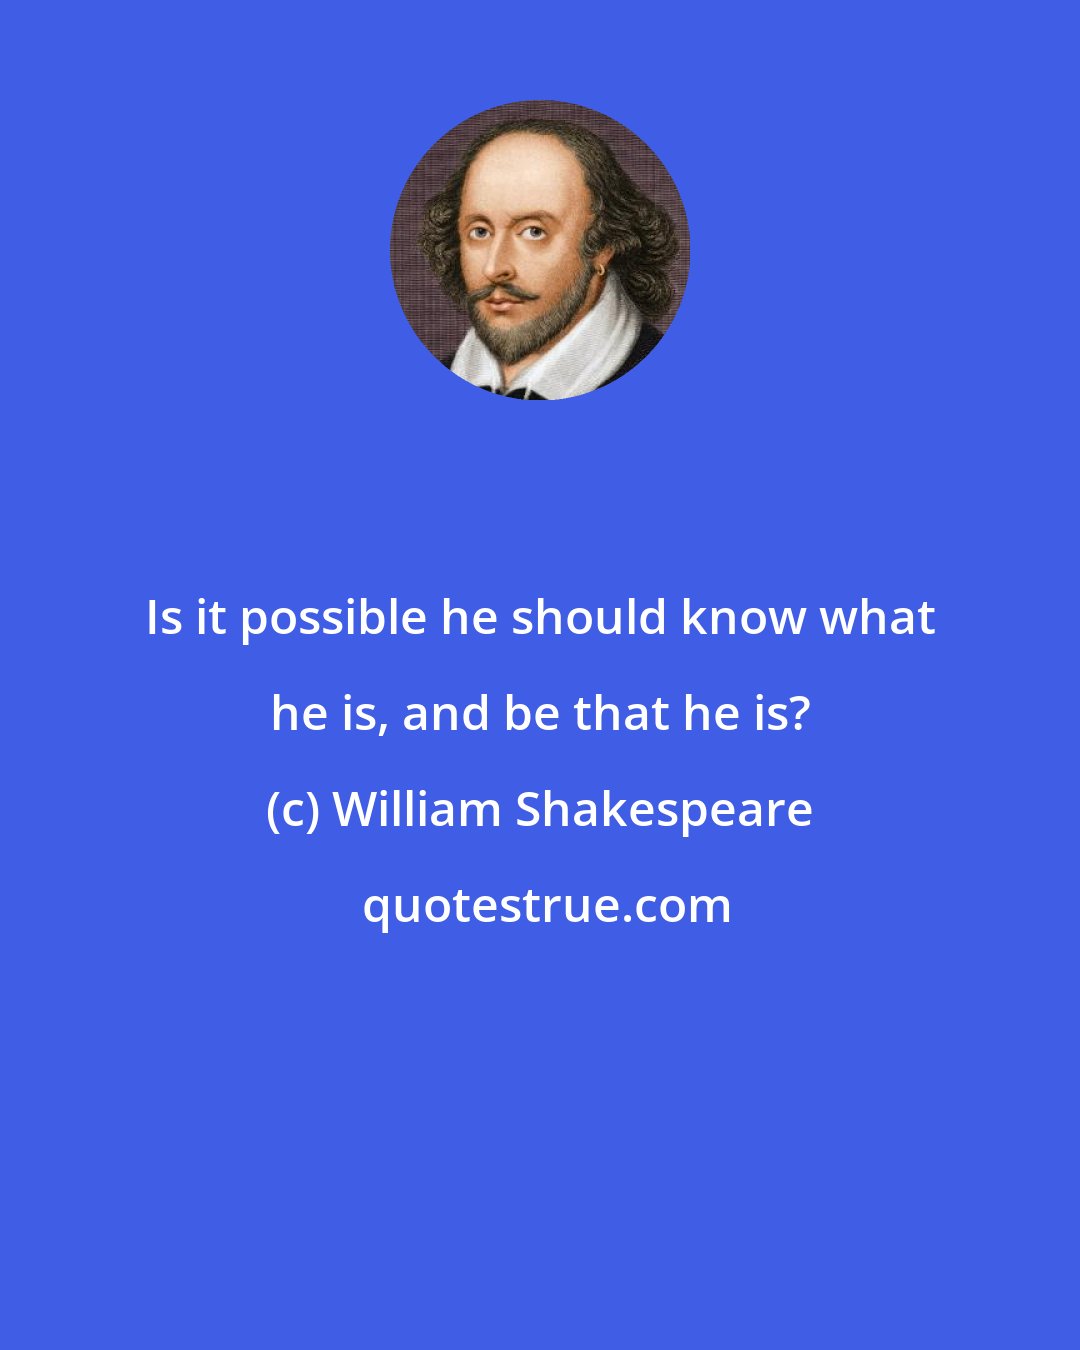 William Shakespeare: Is it possible he should know what he is, and be that he is?